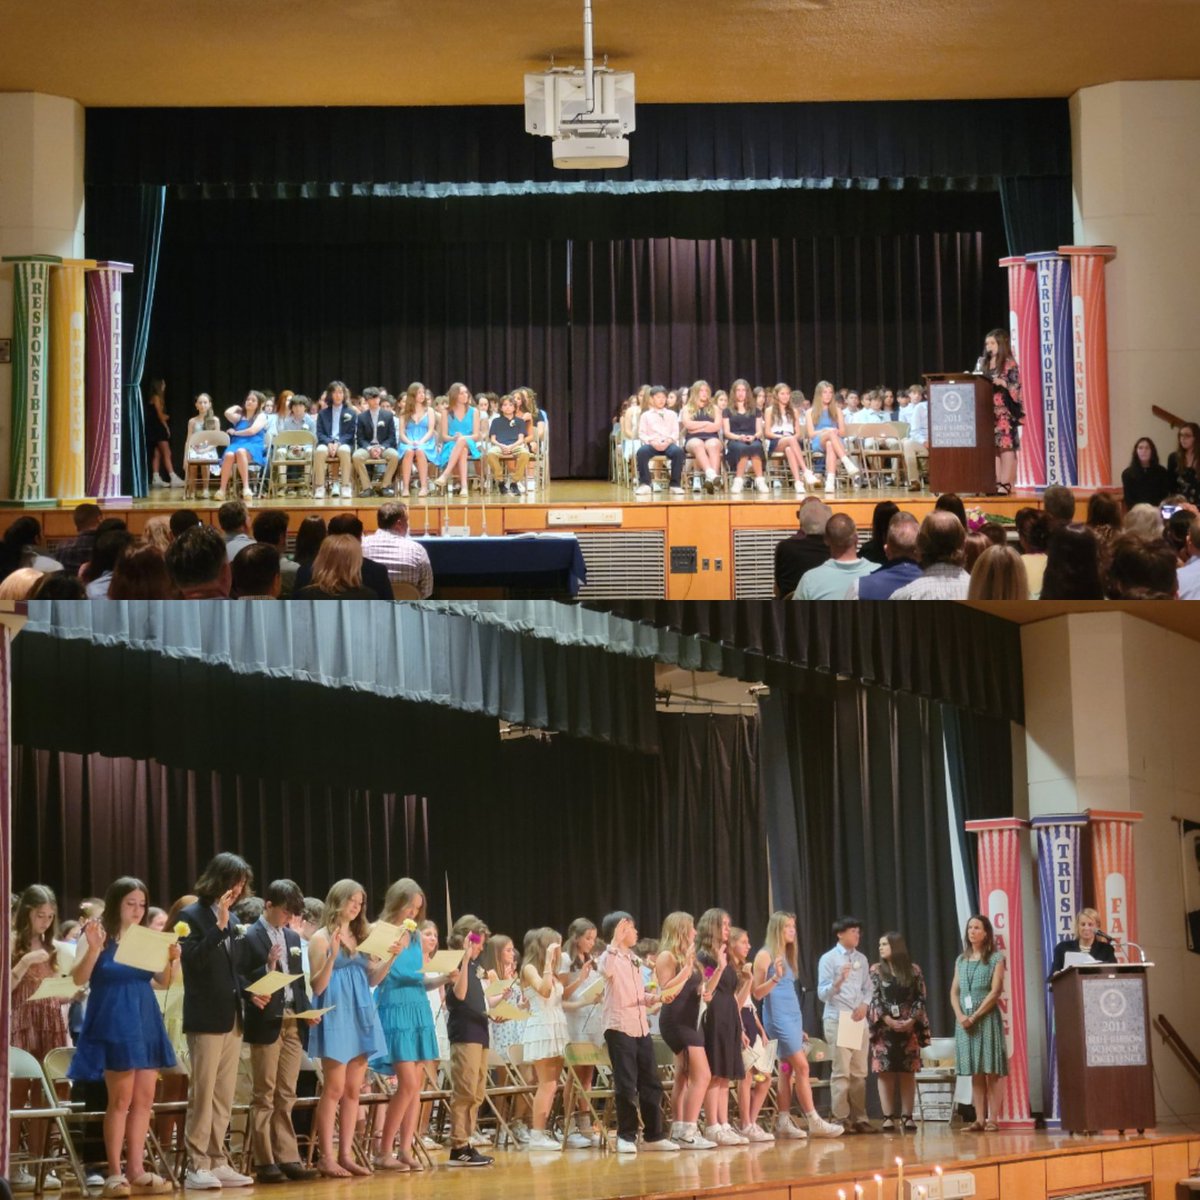 Congratulations to tonight's inductees into the Oldfield Middle School Chapter of the National Junior Honor Society! We are so proud of you! Thank you to Mrs. O'Brien and Mrs. Aline for their hard work organizing the event! #OneHFamily #HFStrongerTogether #HFUnited